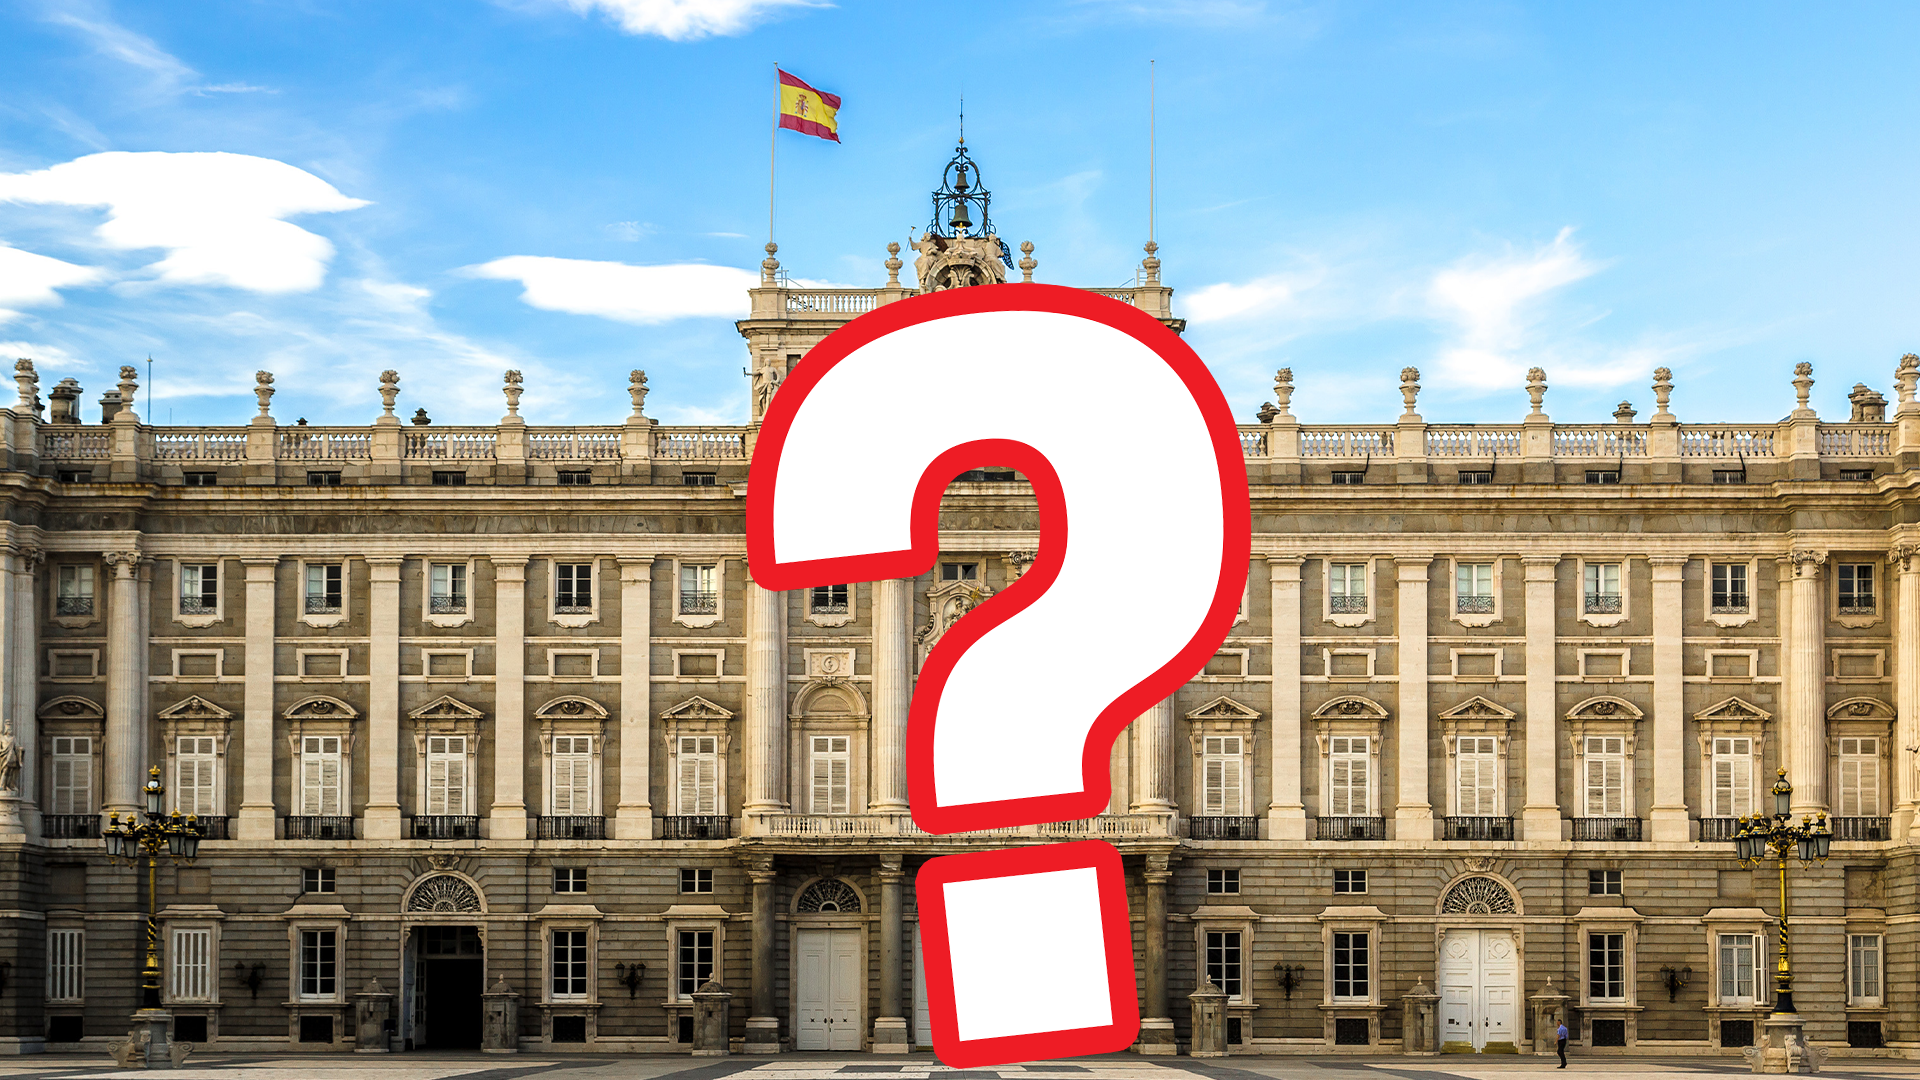 Spanish palace with question mark 